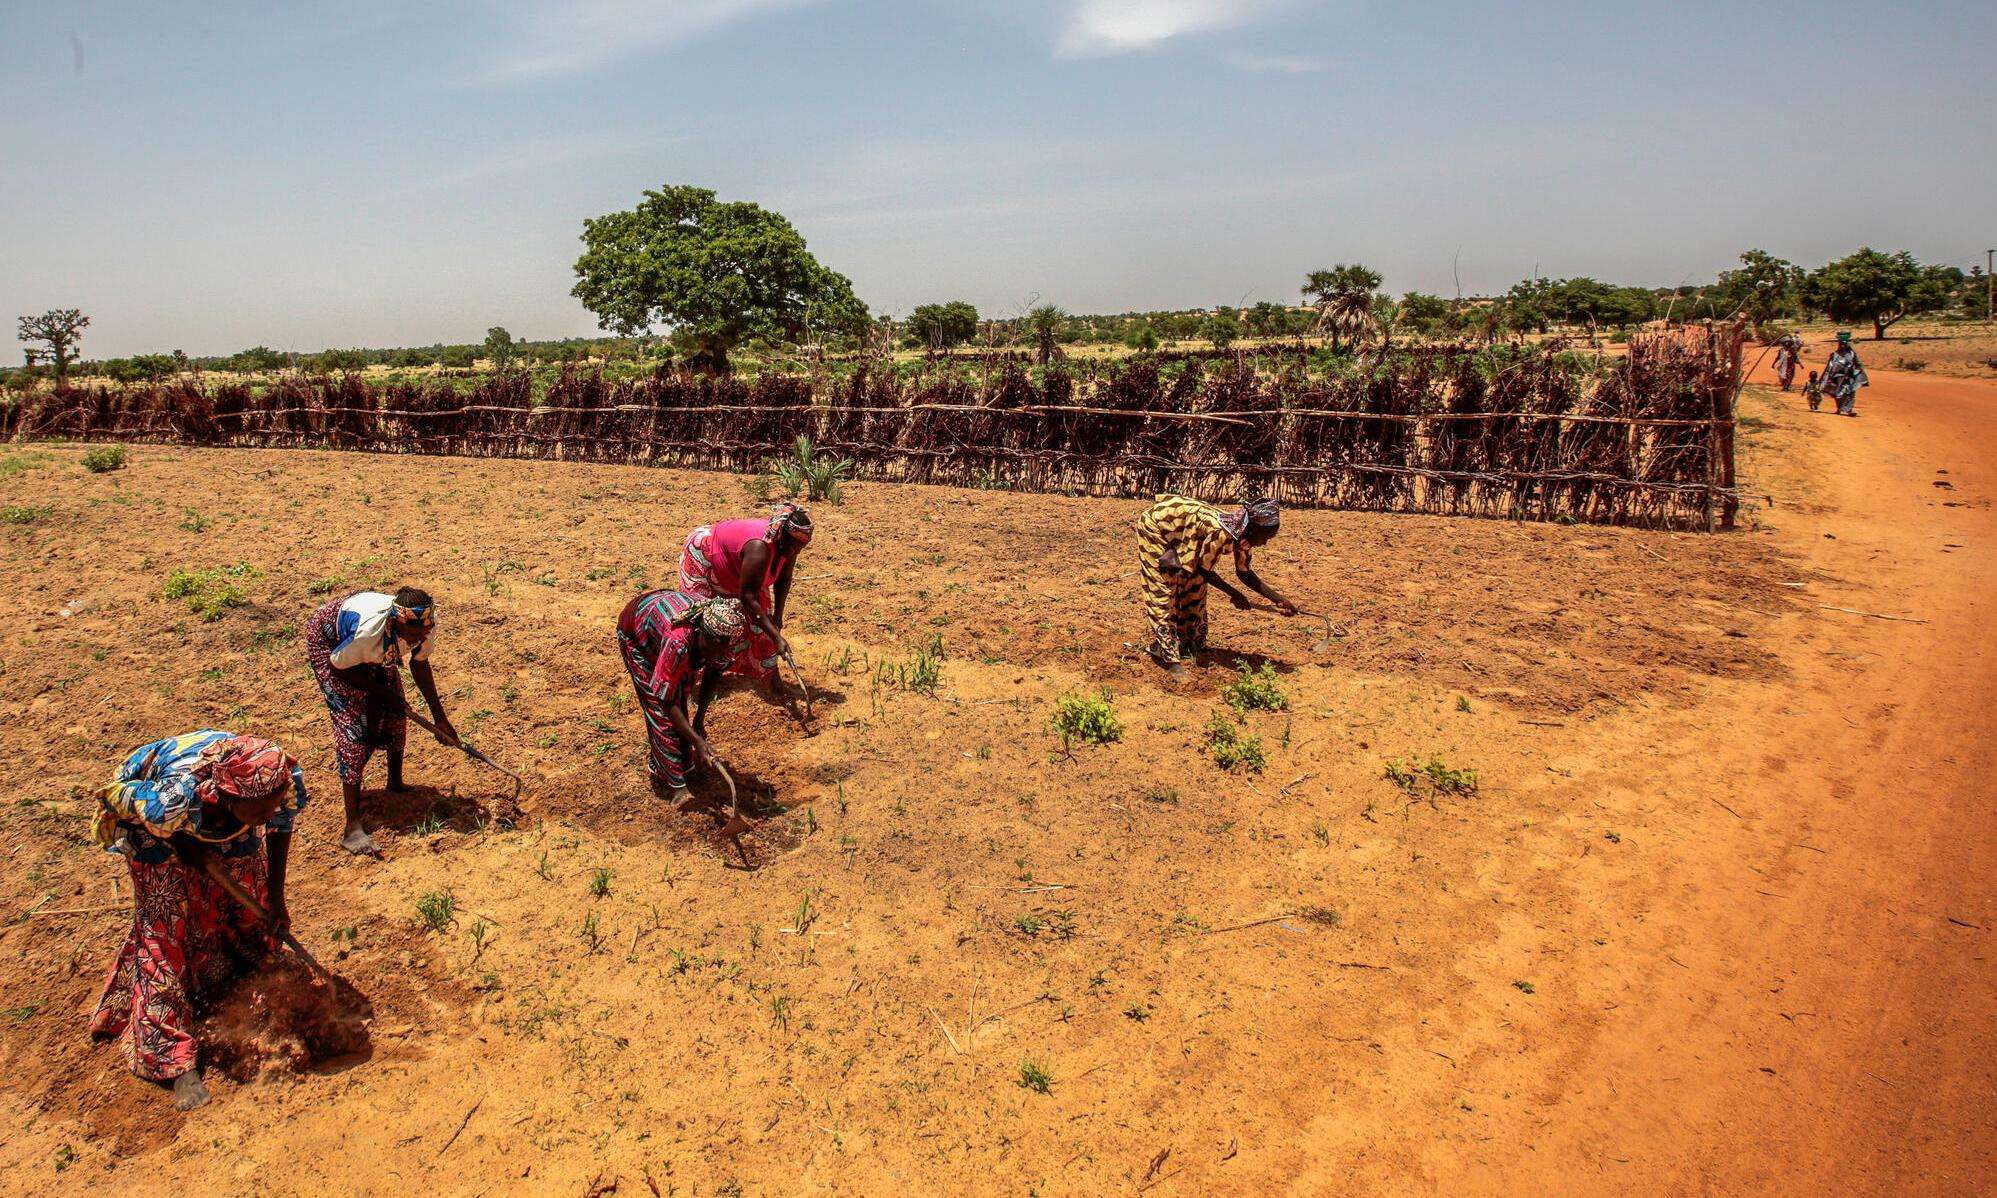 Farmers cultivate their land near the village of Riko in Katsina State amid a drought.